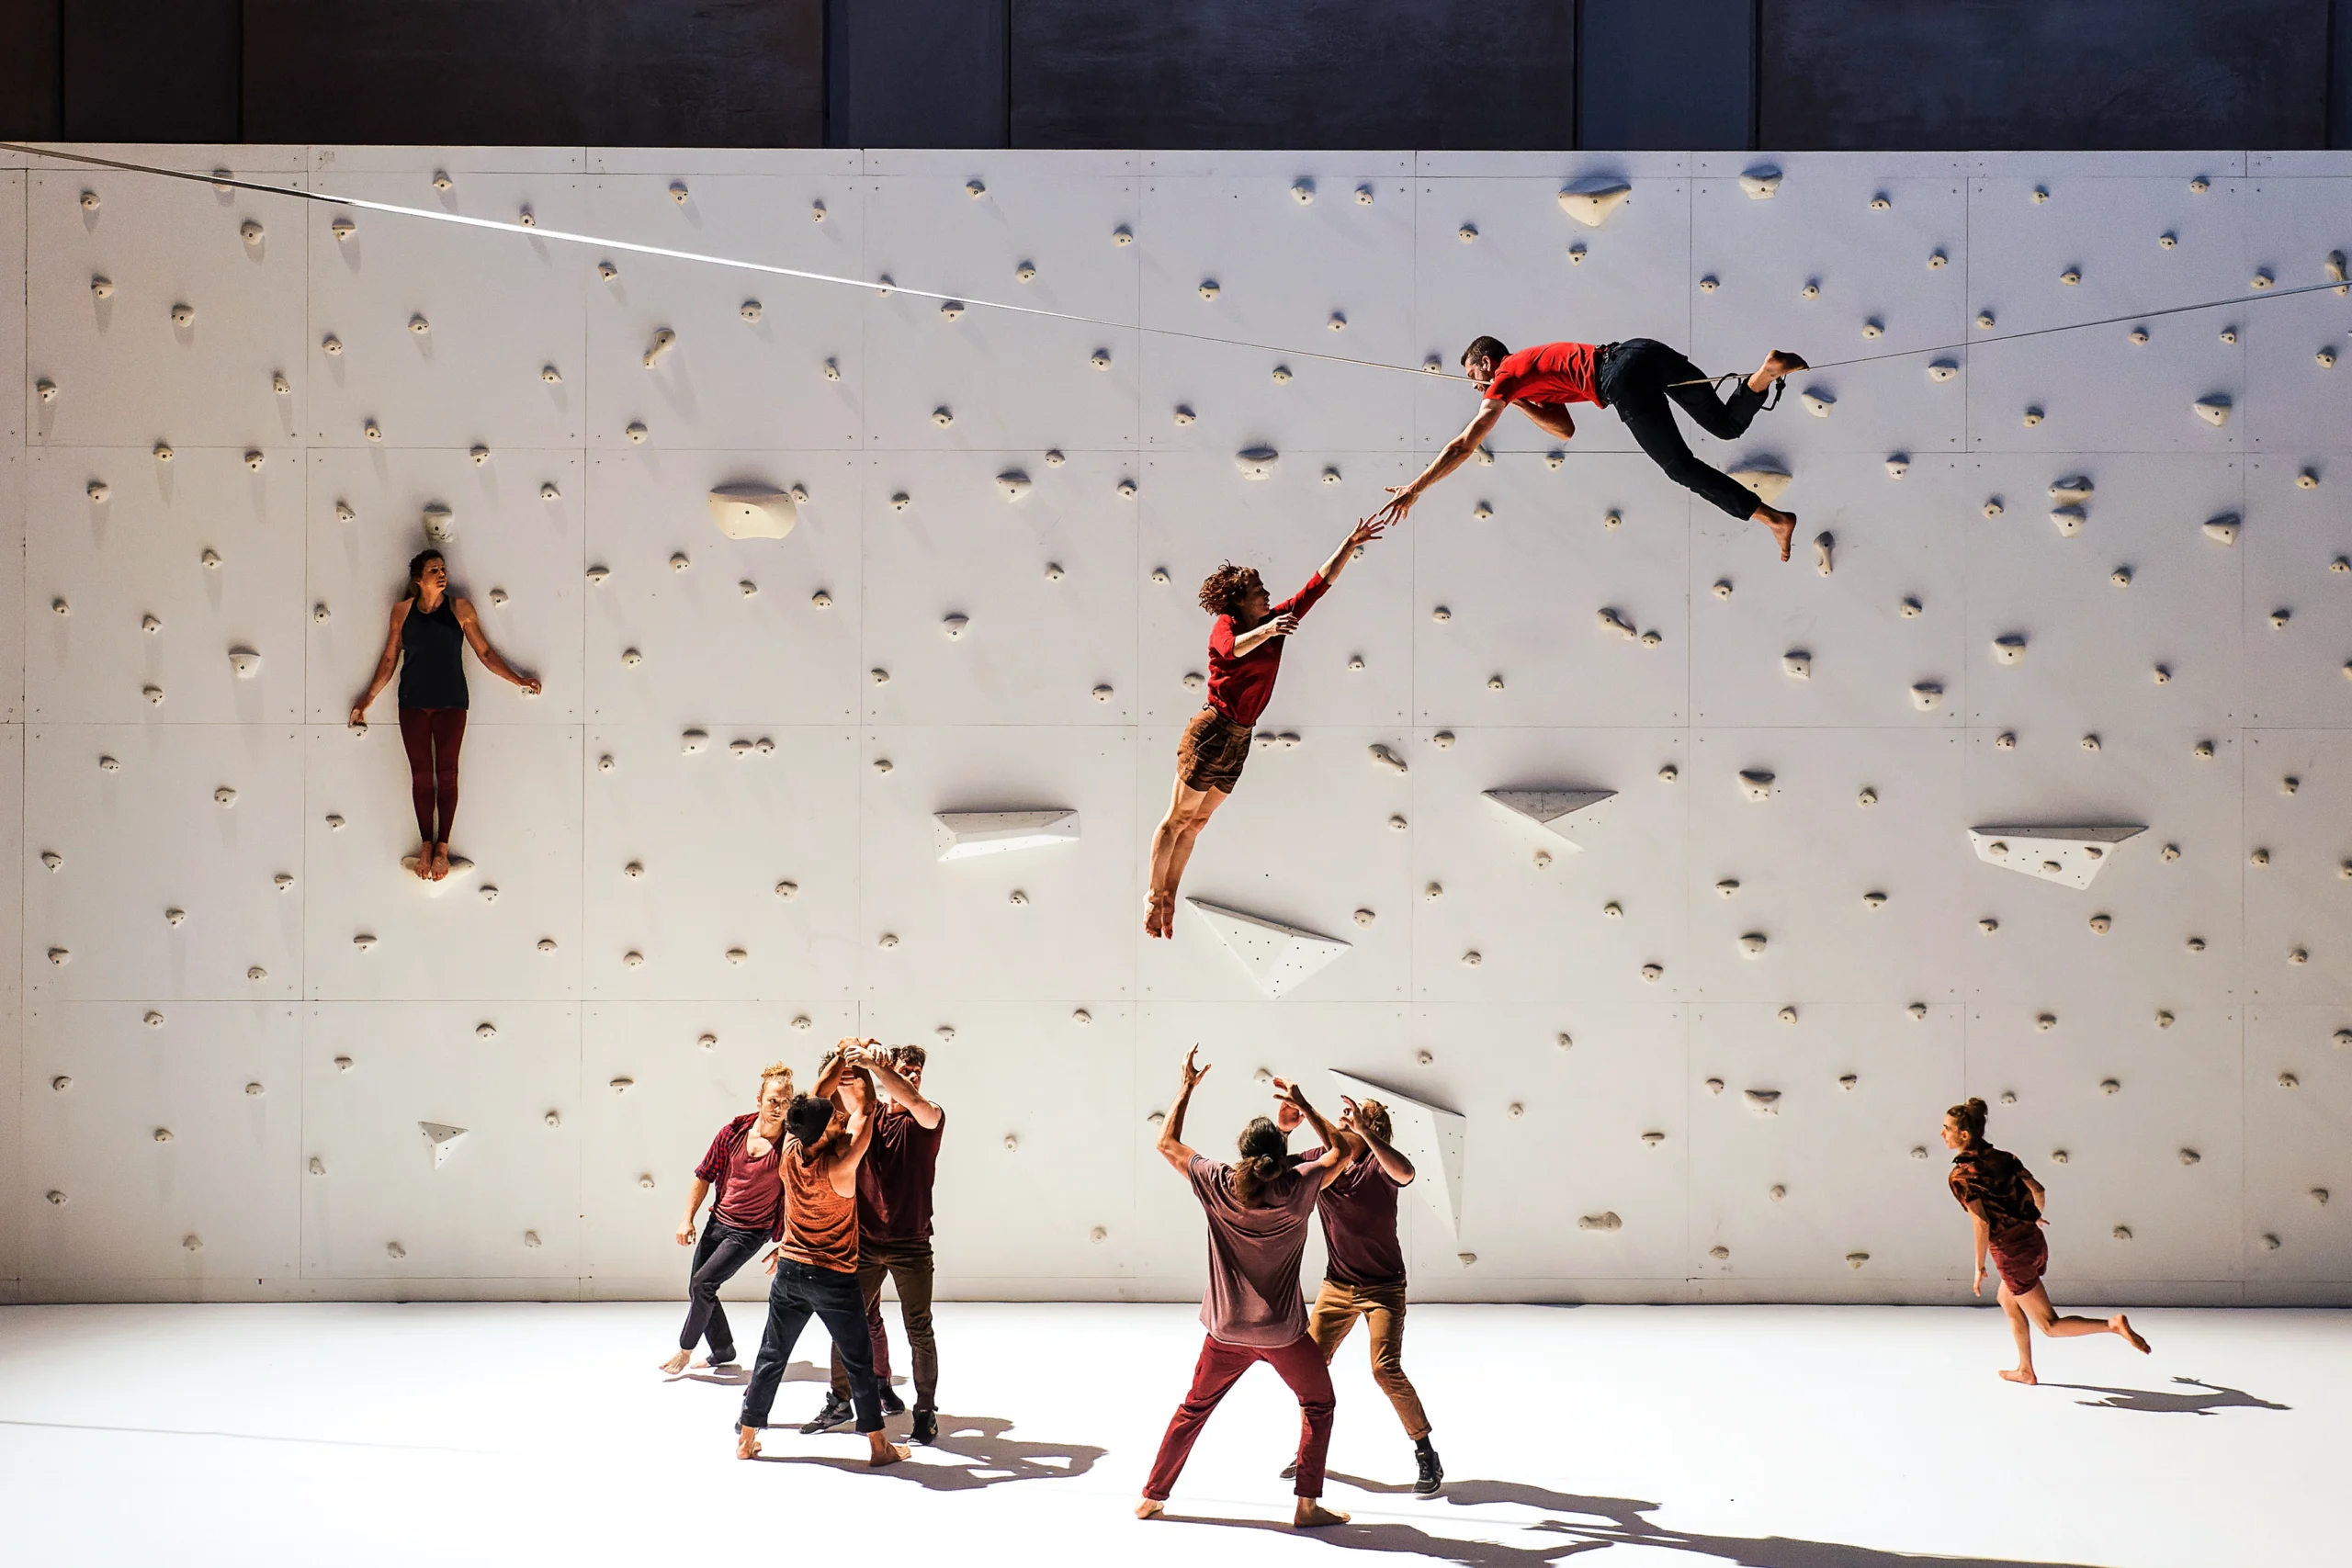 High above a white stage, a dancer lies on his stomach on a tightrope, another dancer swinging down from his hand. Two pairs of dancers stand facing each other below; one set has just flung their compatriot in the air, while the other braces to catch a falling body. Two dancers run in loops at the edges. Another balances on a narrow ledge 10 feet above the stage, back pressed to a rock climbing wall upstage.